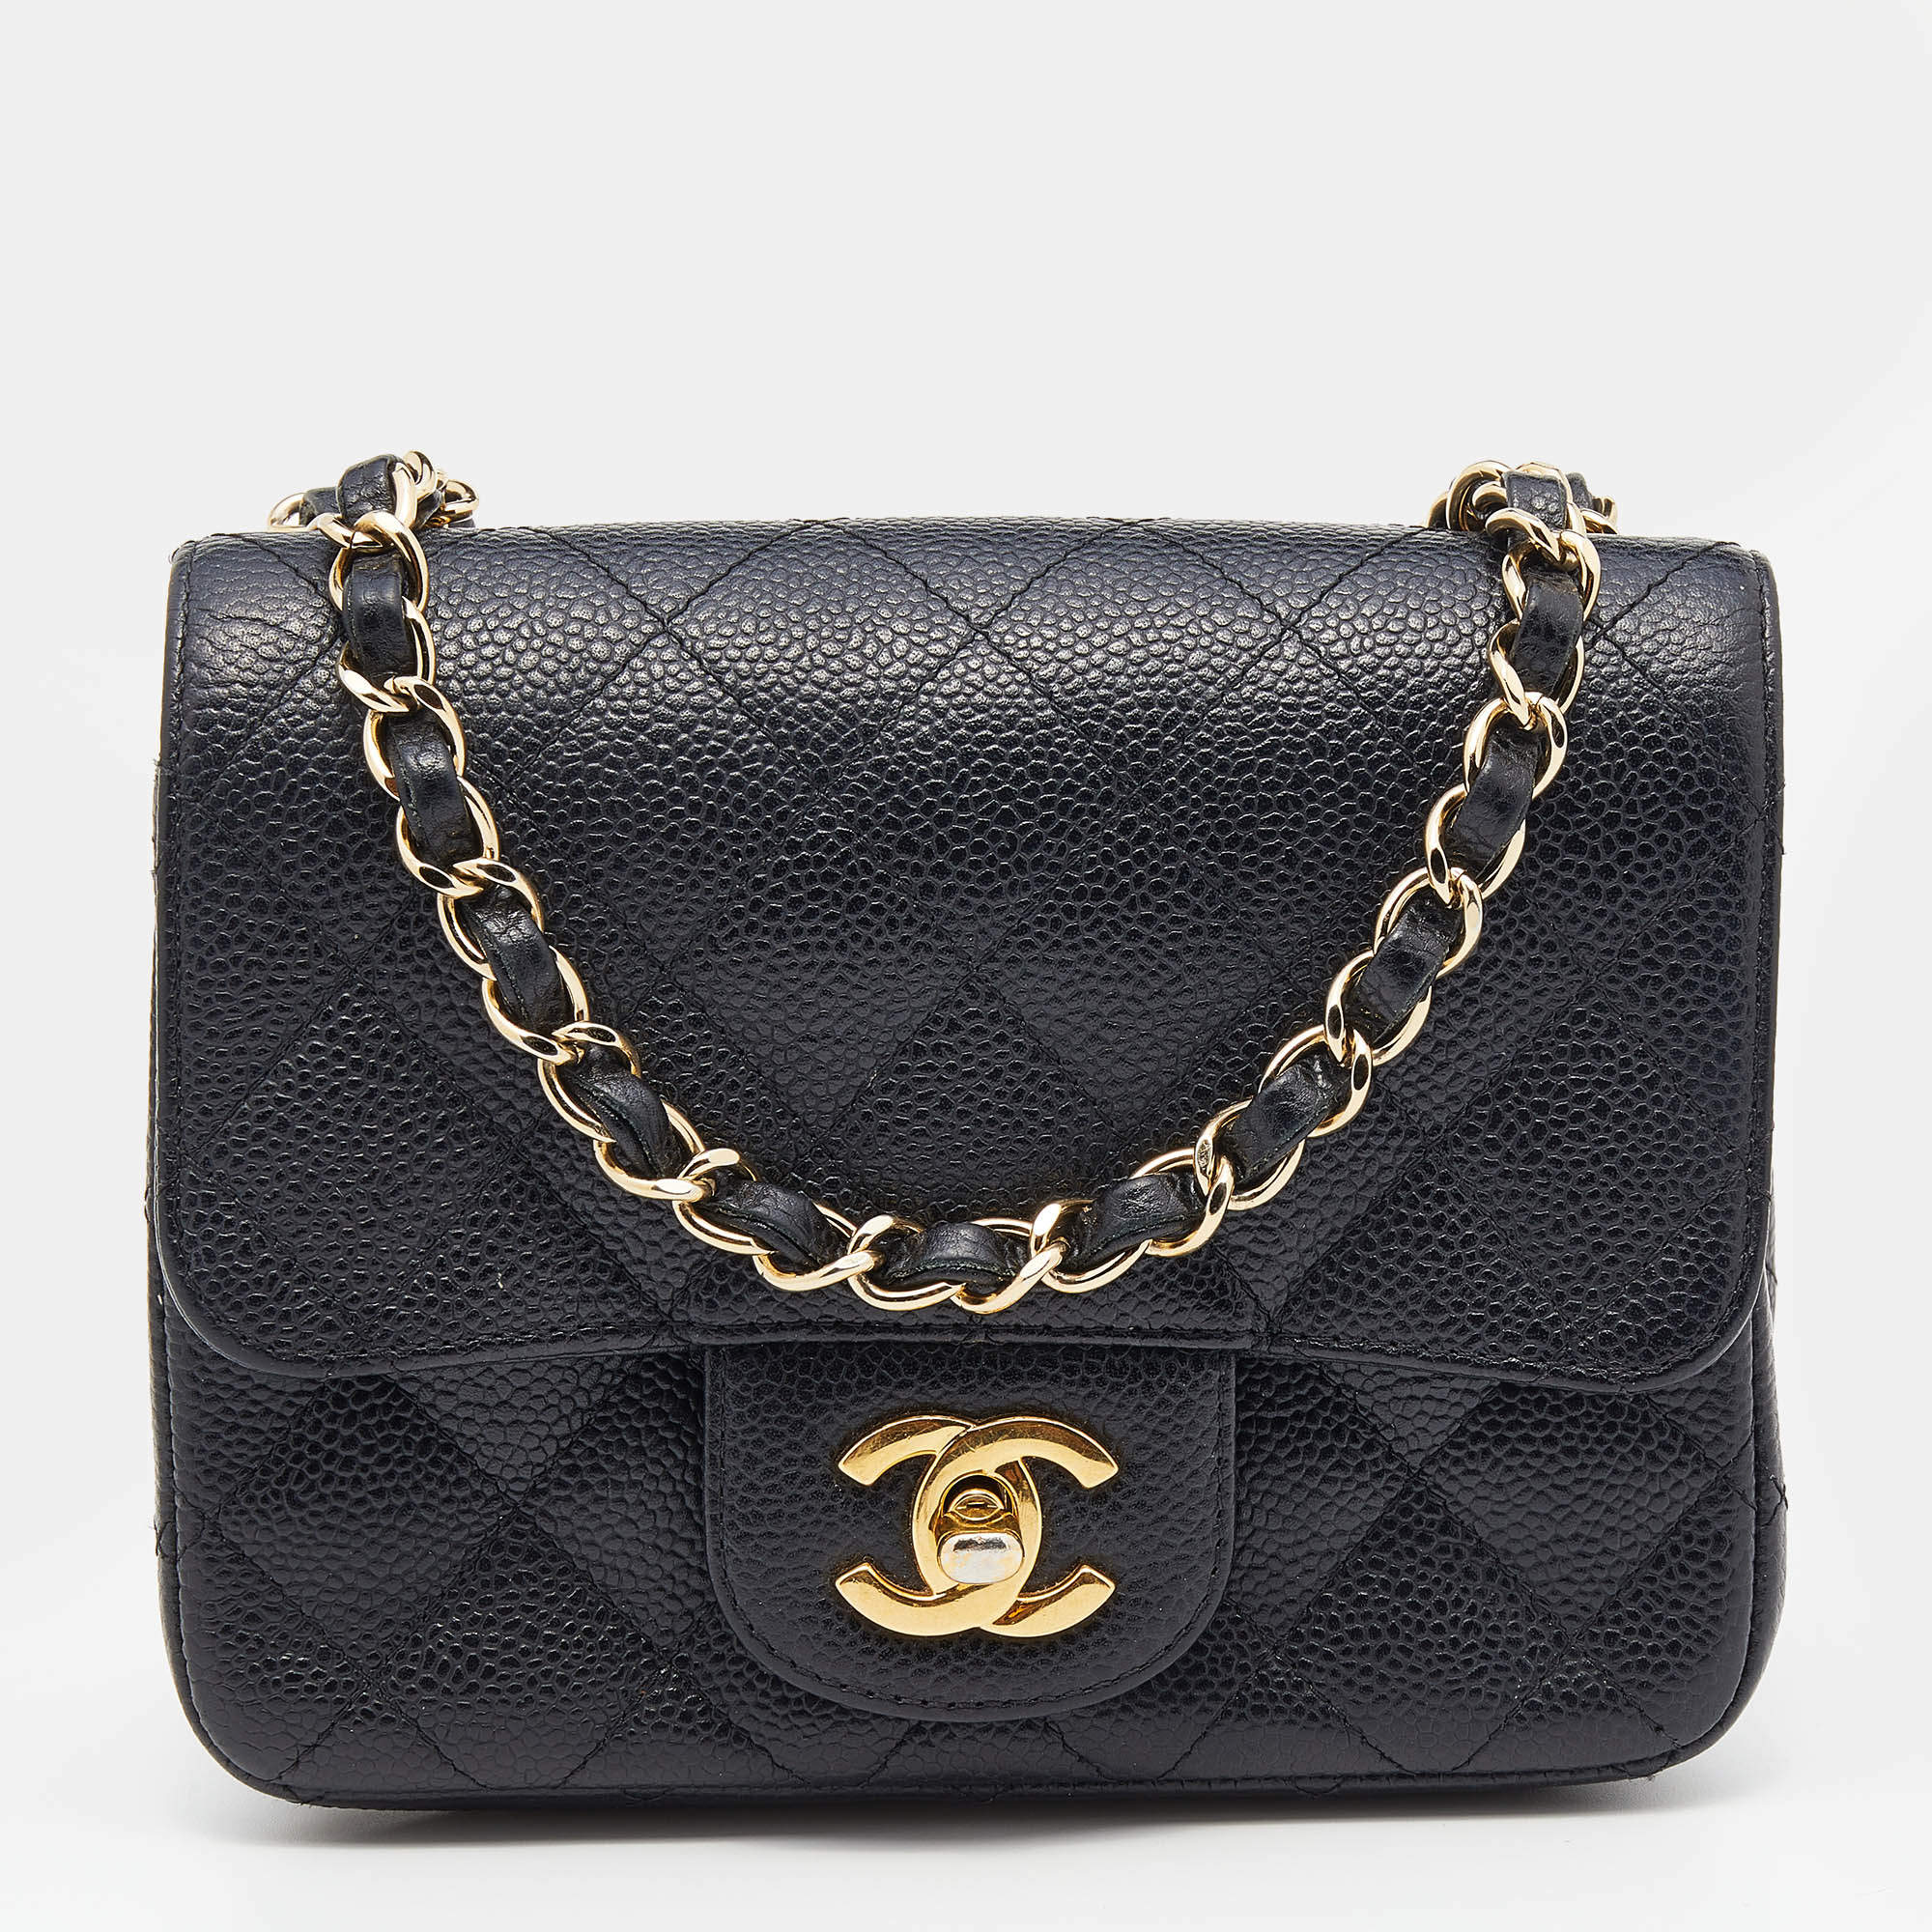 10 Things You Should Know about Chanel Flap Bags